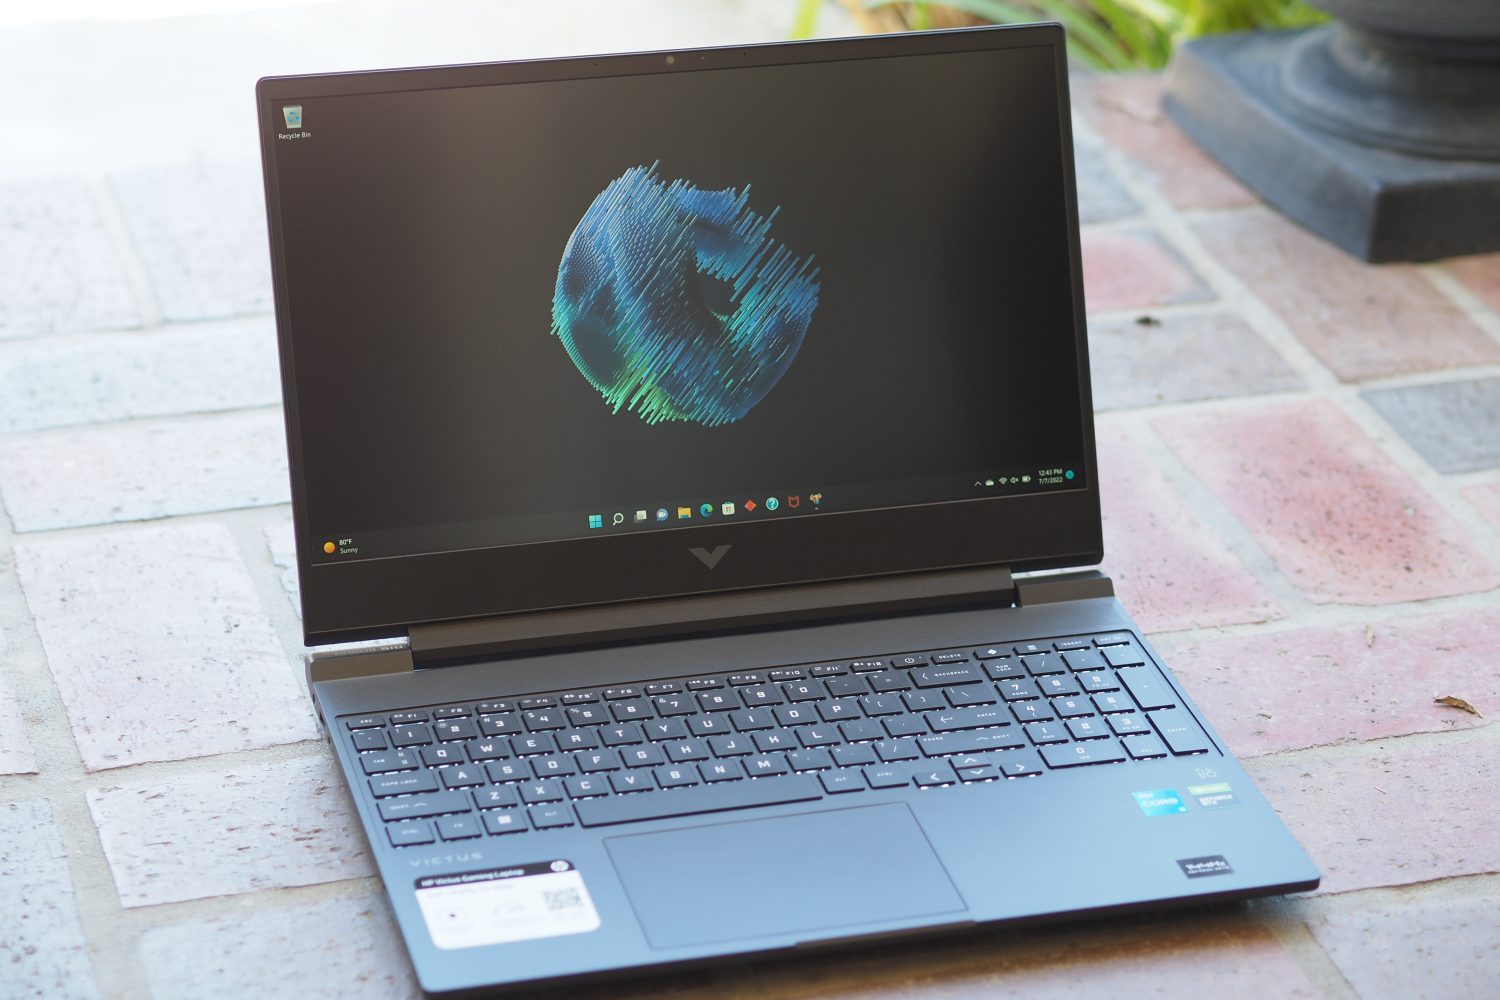 HP Victus 15 Review: A Standard Gaming Laptop - MySmartPrice